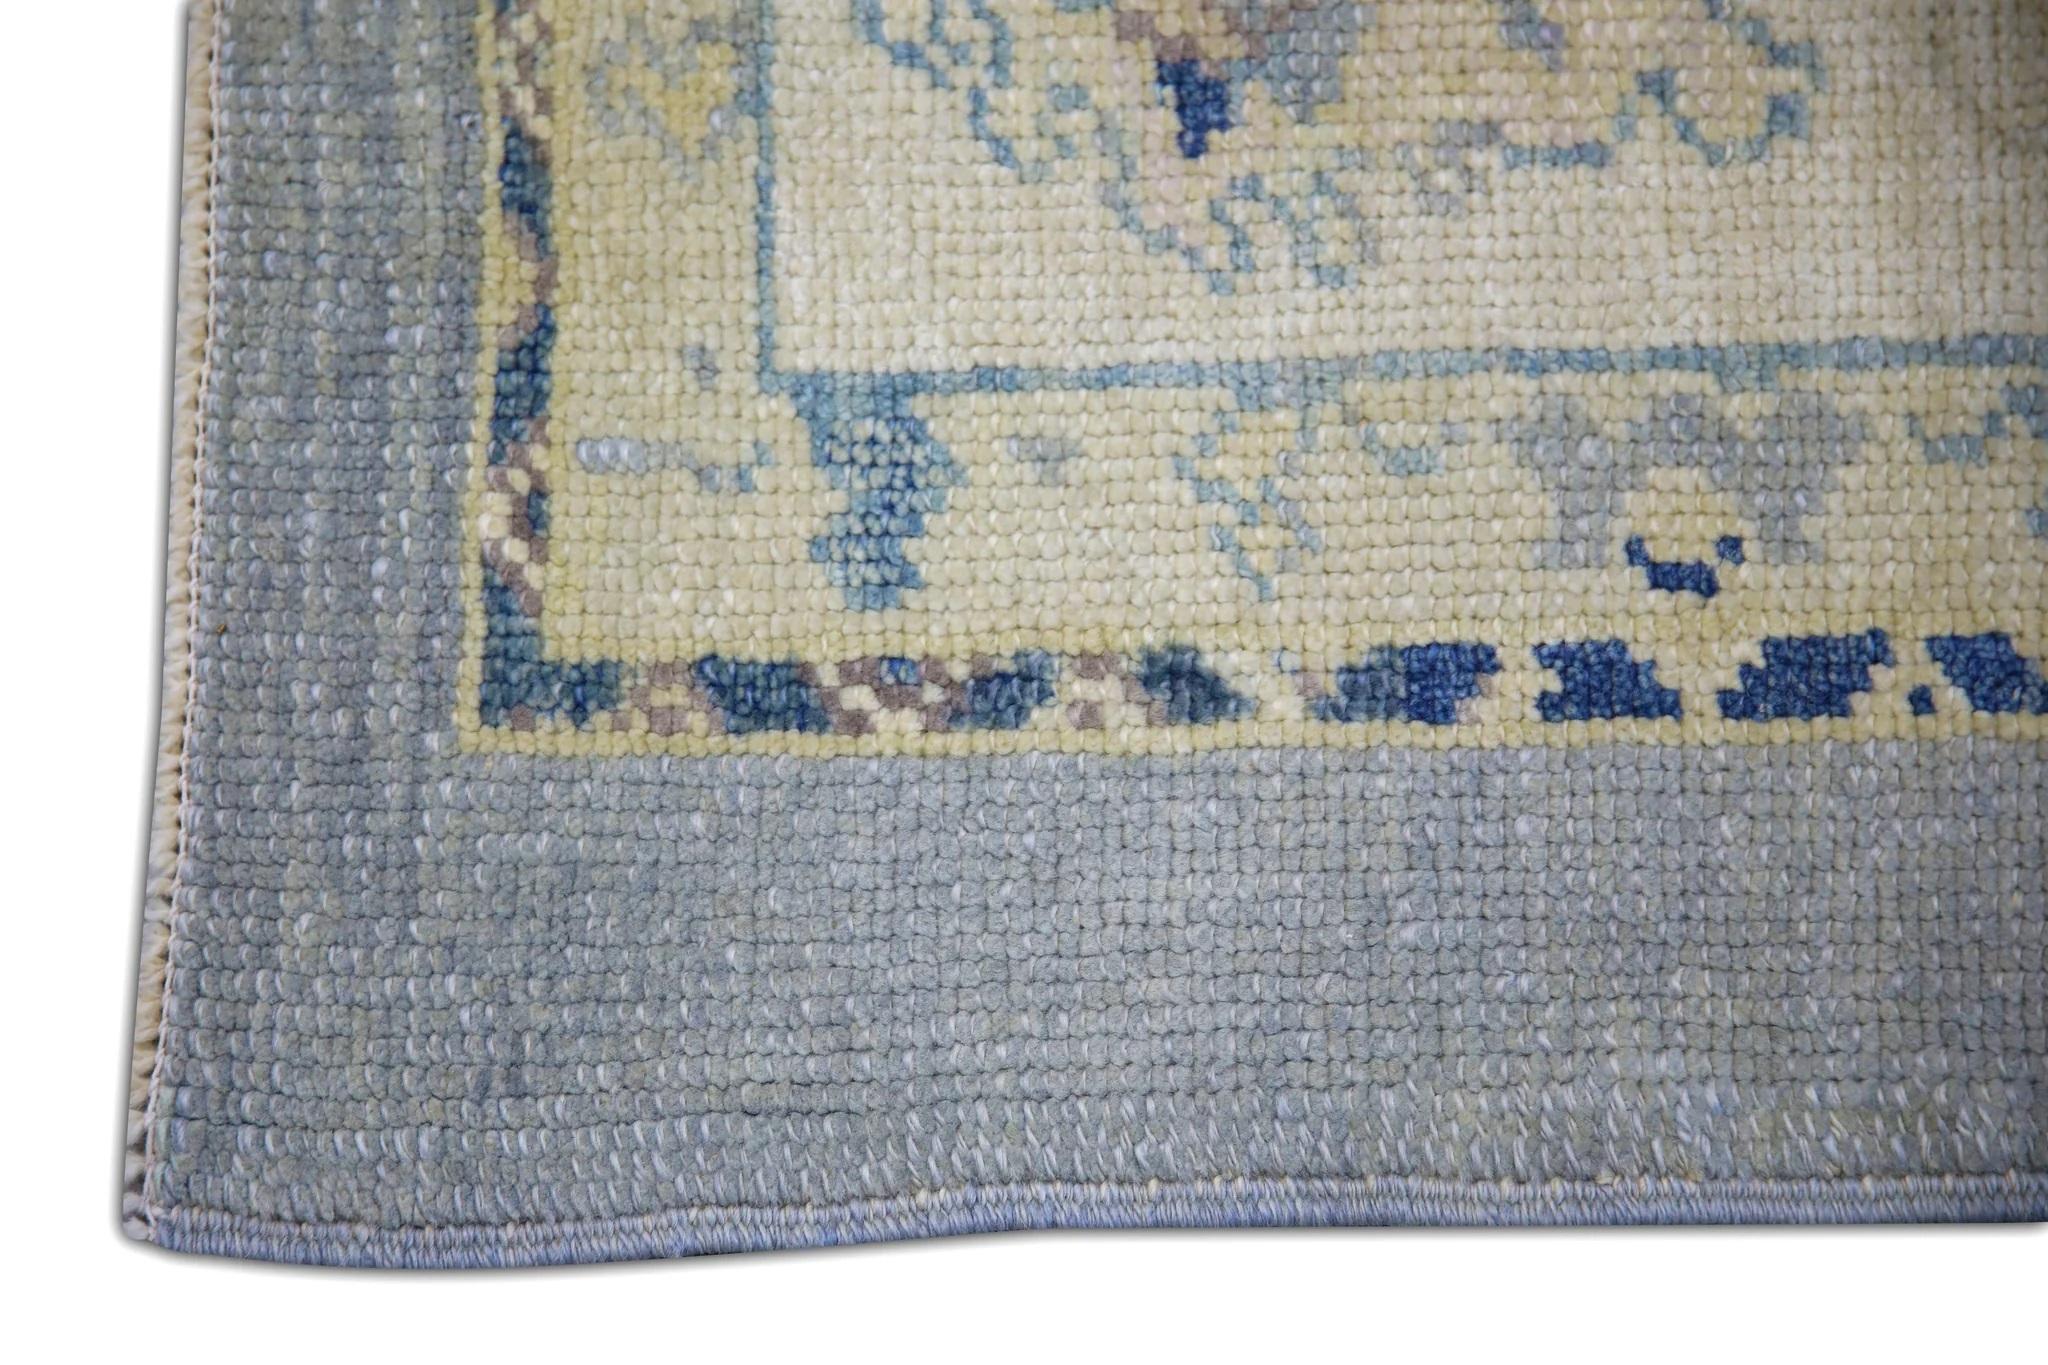 Vegetable Dyed Handwoven Wool Floral Turkish Oushak Rug in Shades of Blue 9' x 10'6